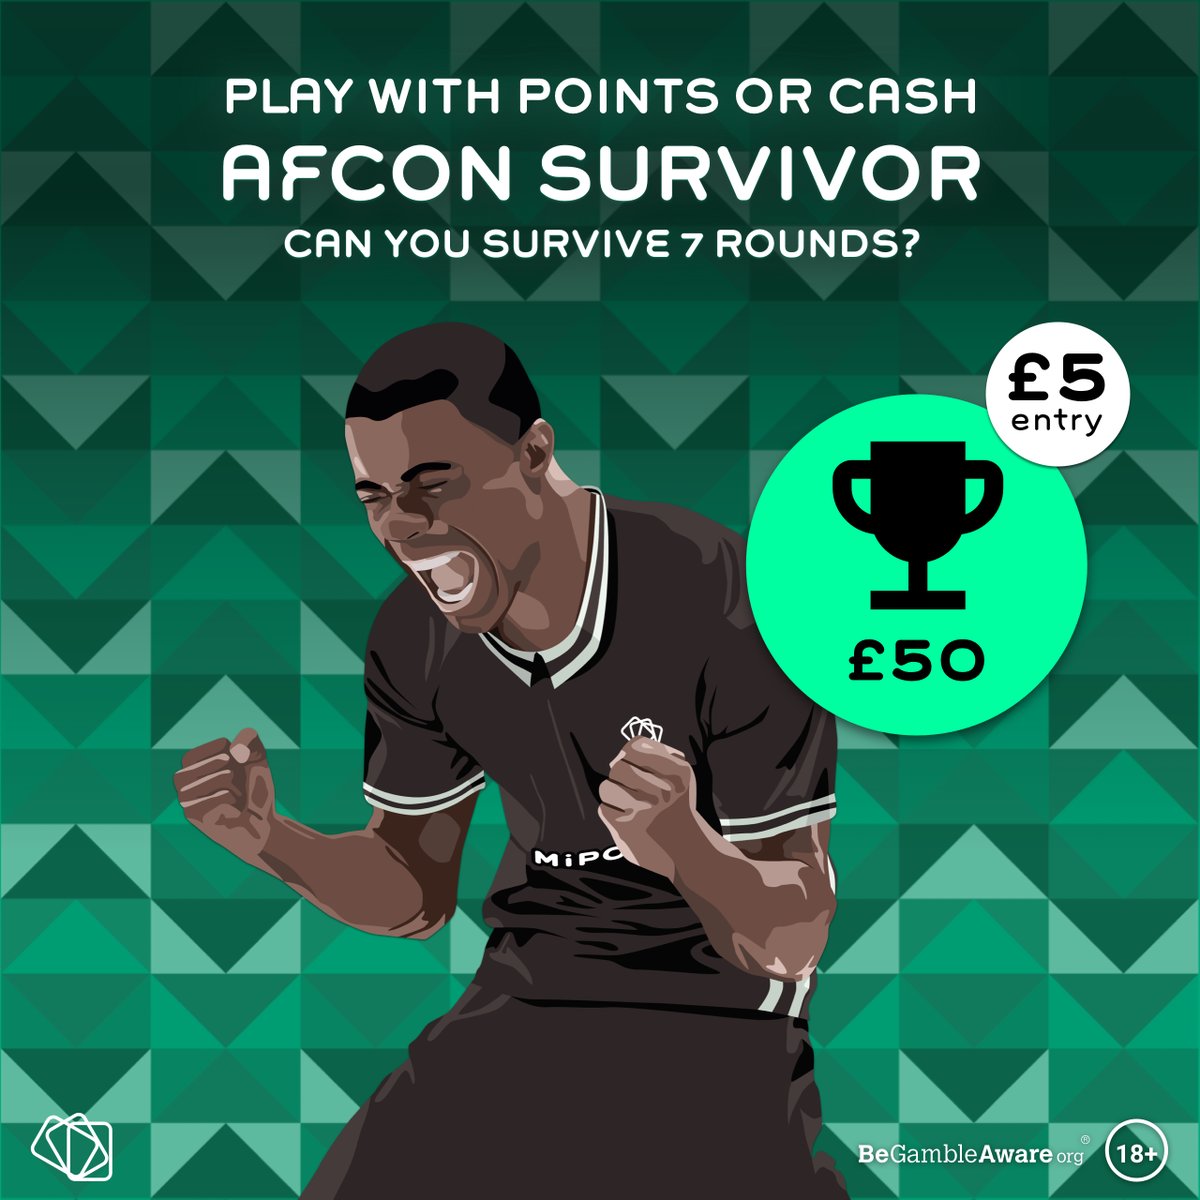 #AFCON2023 kicks off this Saturday! 🌍⚽️

Have you joined our Survivor yet? Select a team to win each match day, but chose wisely as you can only pick each team once. ✅❌

Survive all 7 rounds to be a winner. Must be 18. Play now at MiPools.com

#ItPaysToPlay